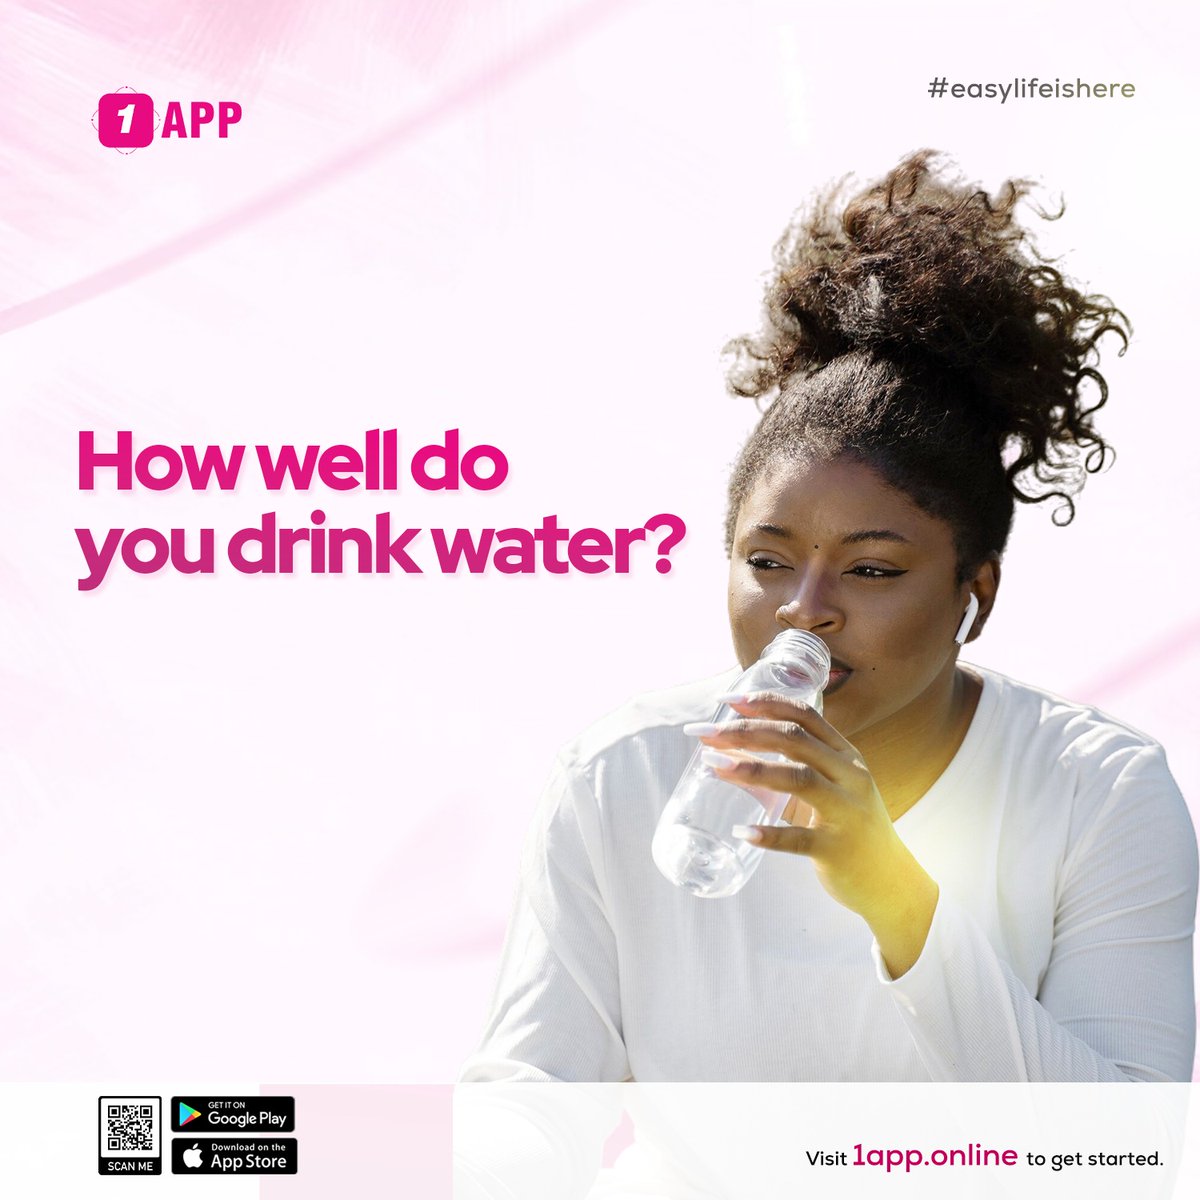 How many times do you drink water in a day?
Let us know

#1app #easylifeishere #paymentsolutions #tuesday